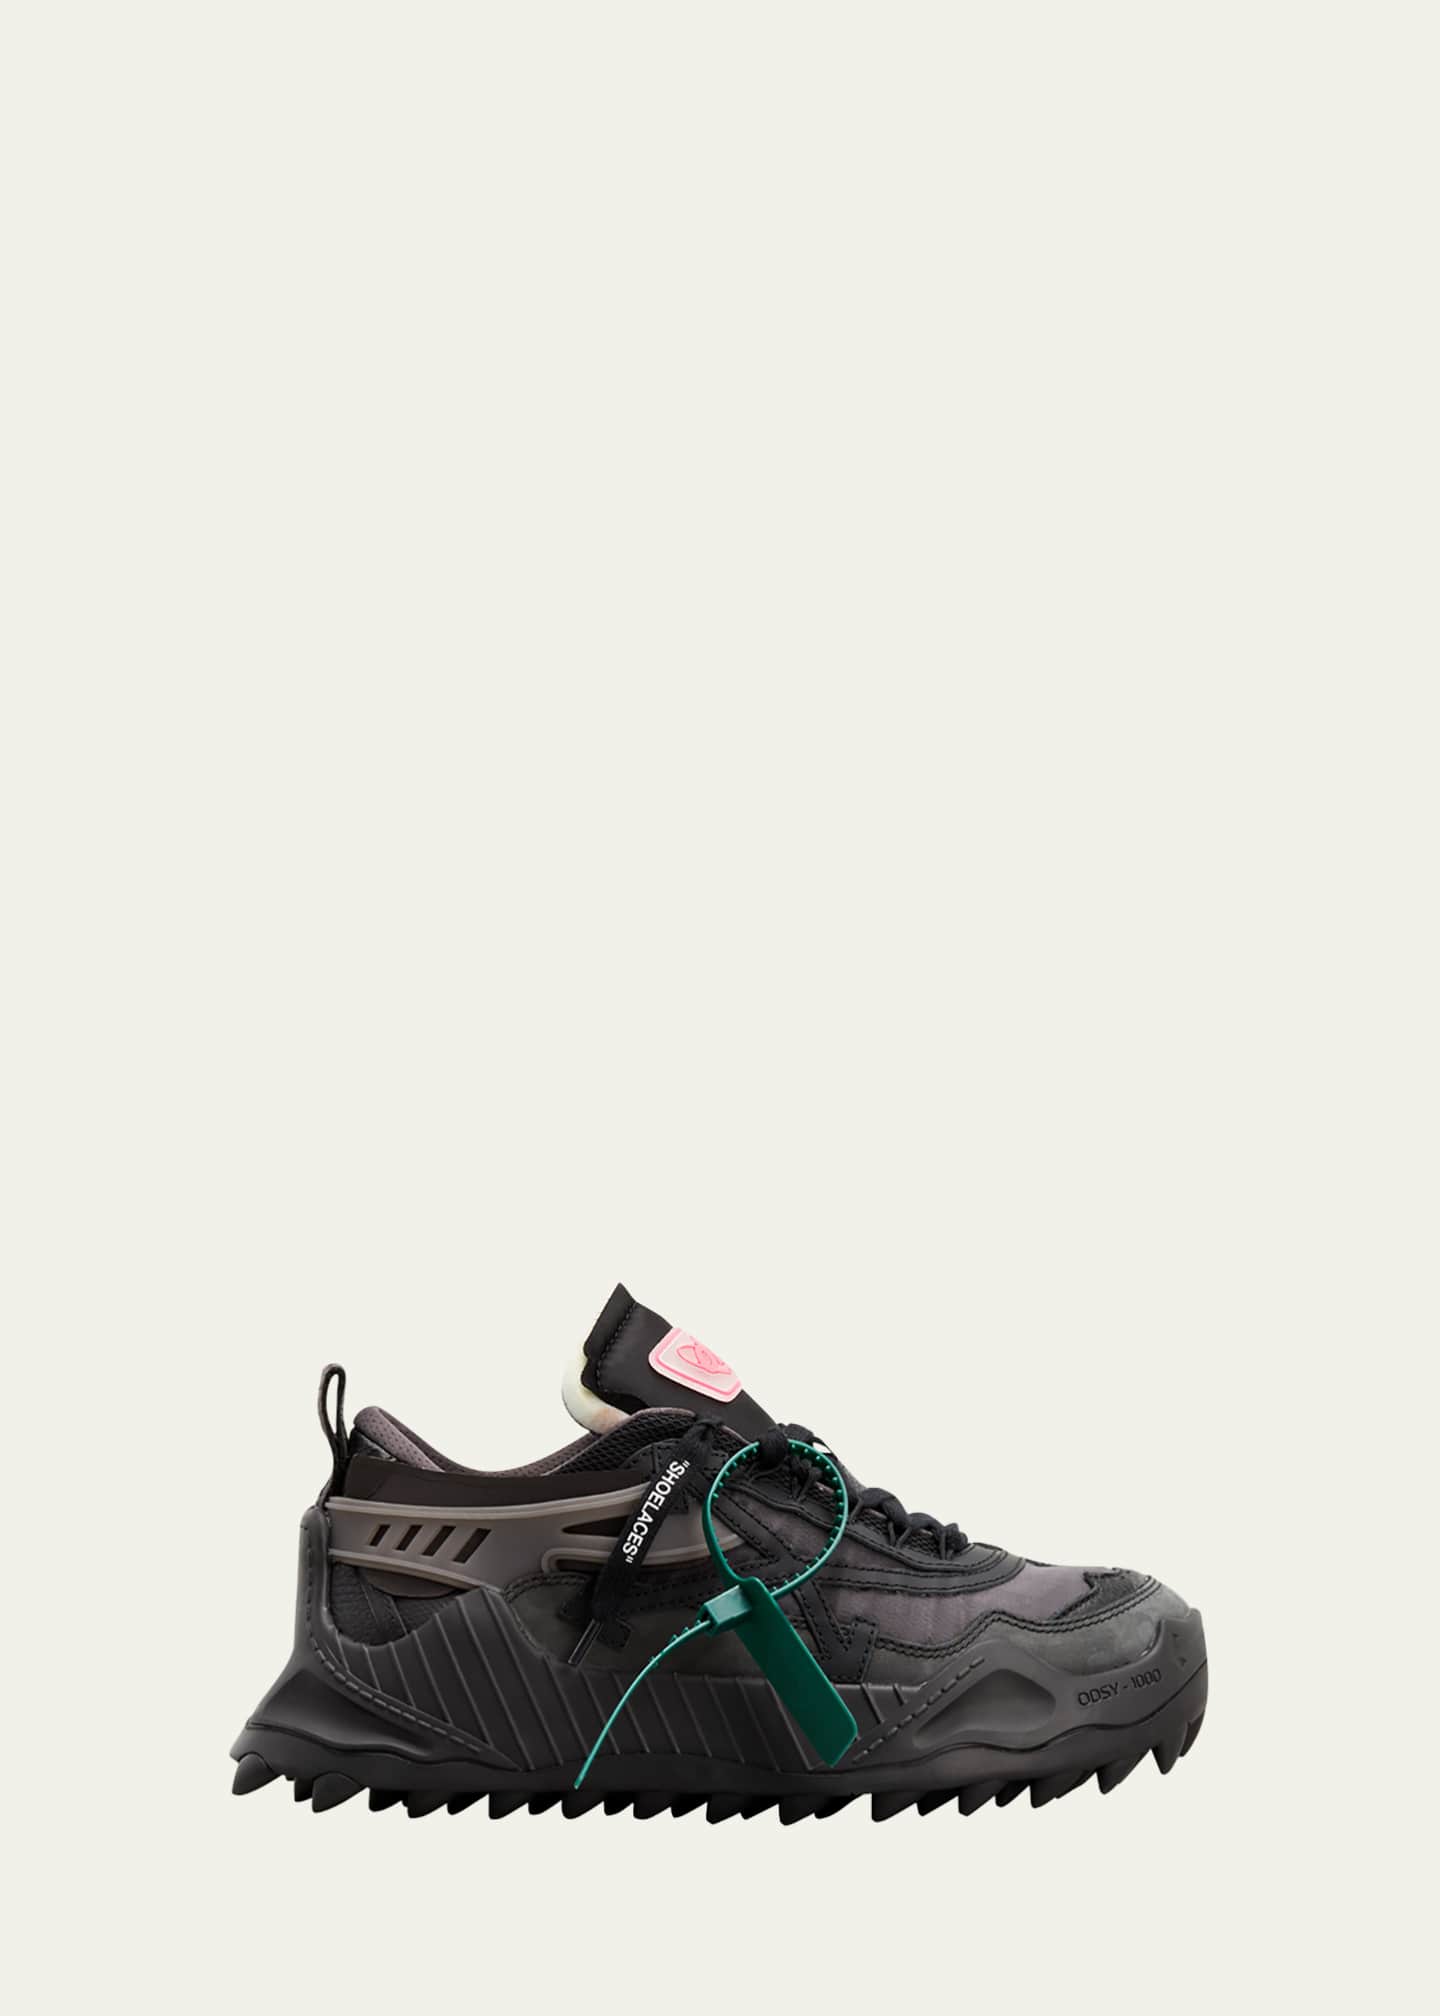 Off-White Men's Odsy-1000 Curved Arrow Sneakers - Bergdorf Goodman